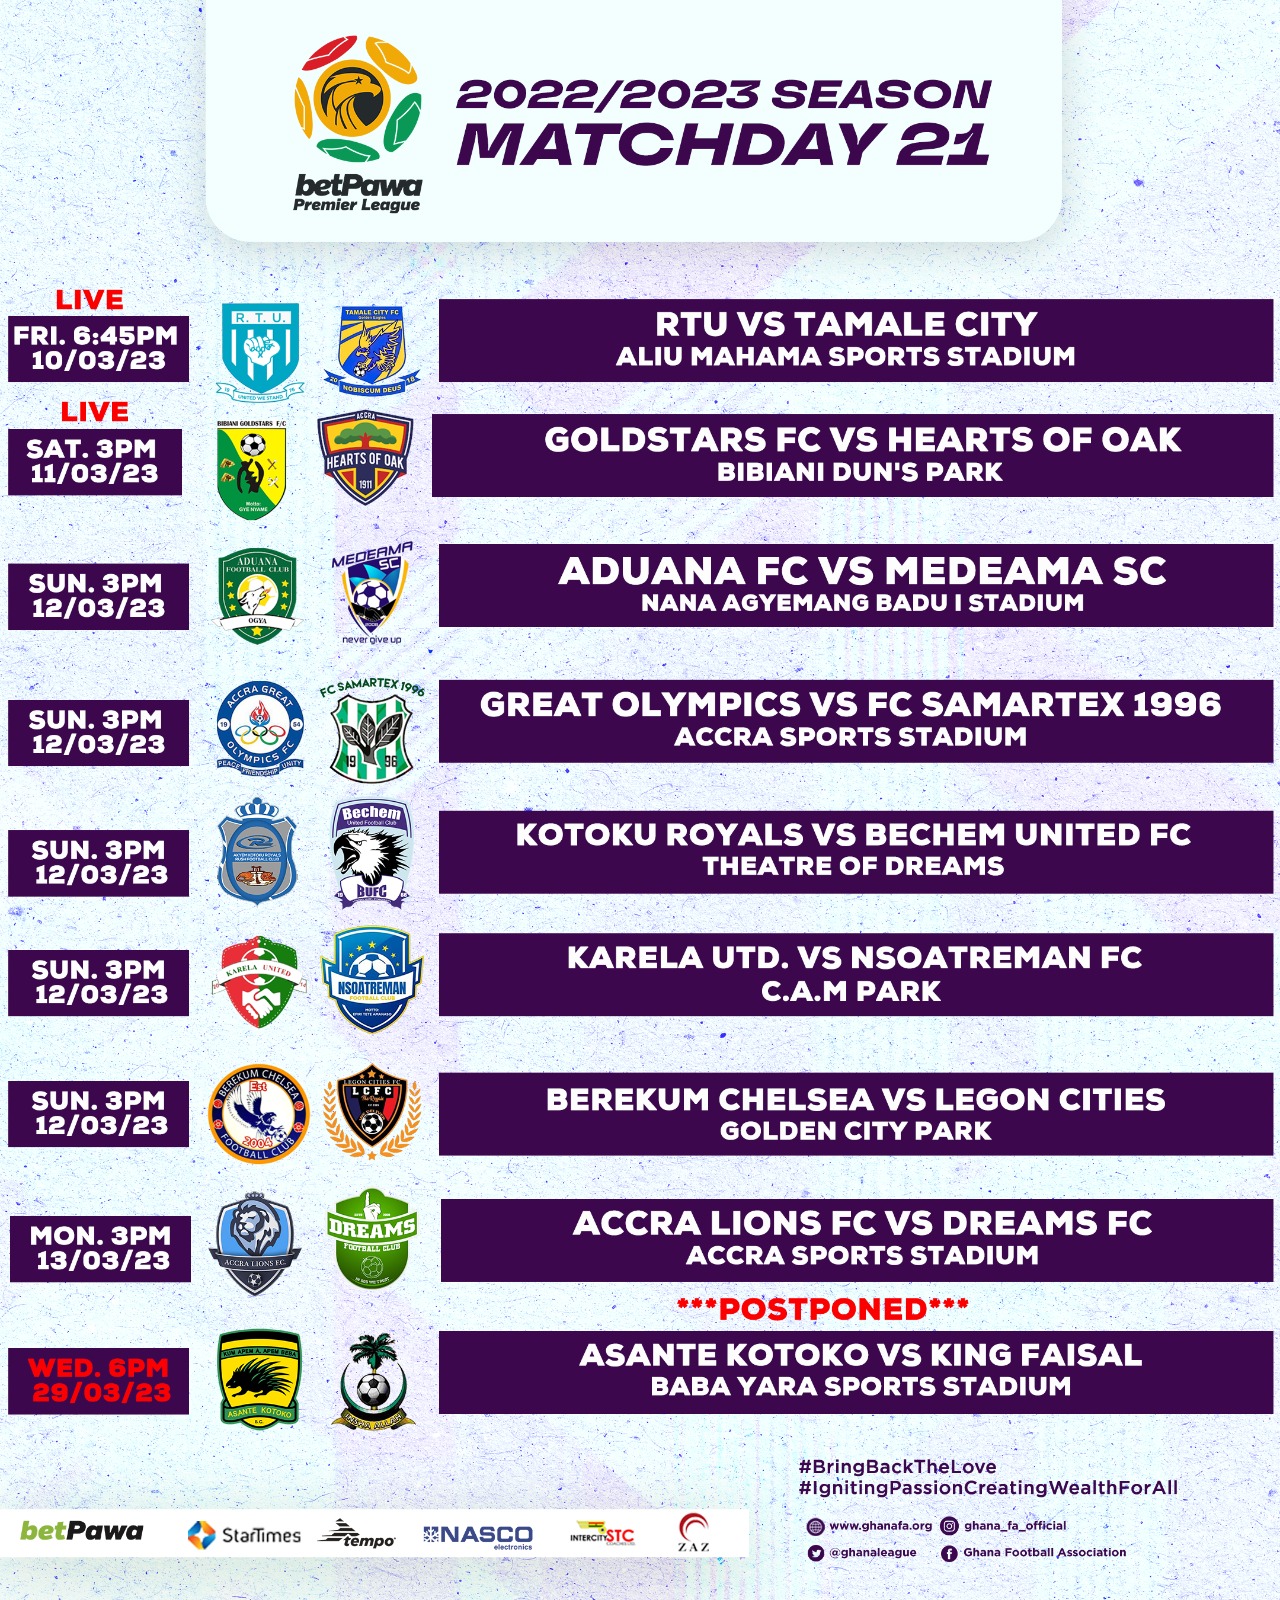 betPawa Premier League Matchday 21 and Matchday 22 schedule confirmed